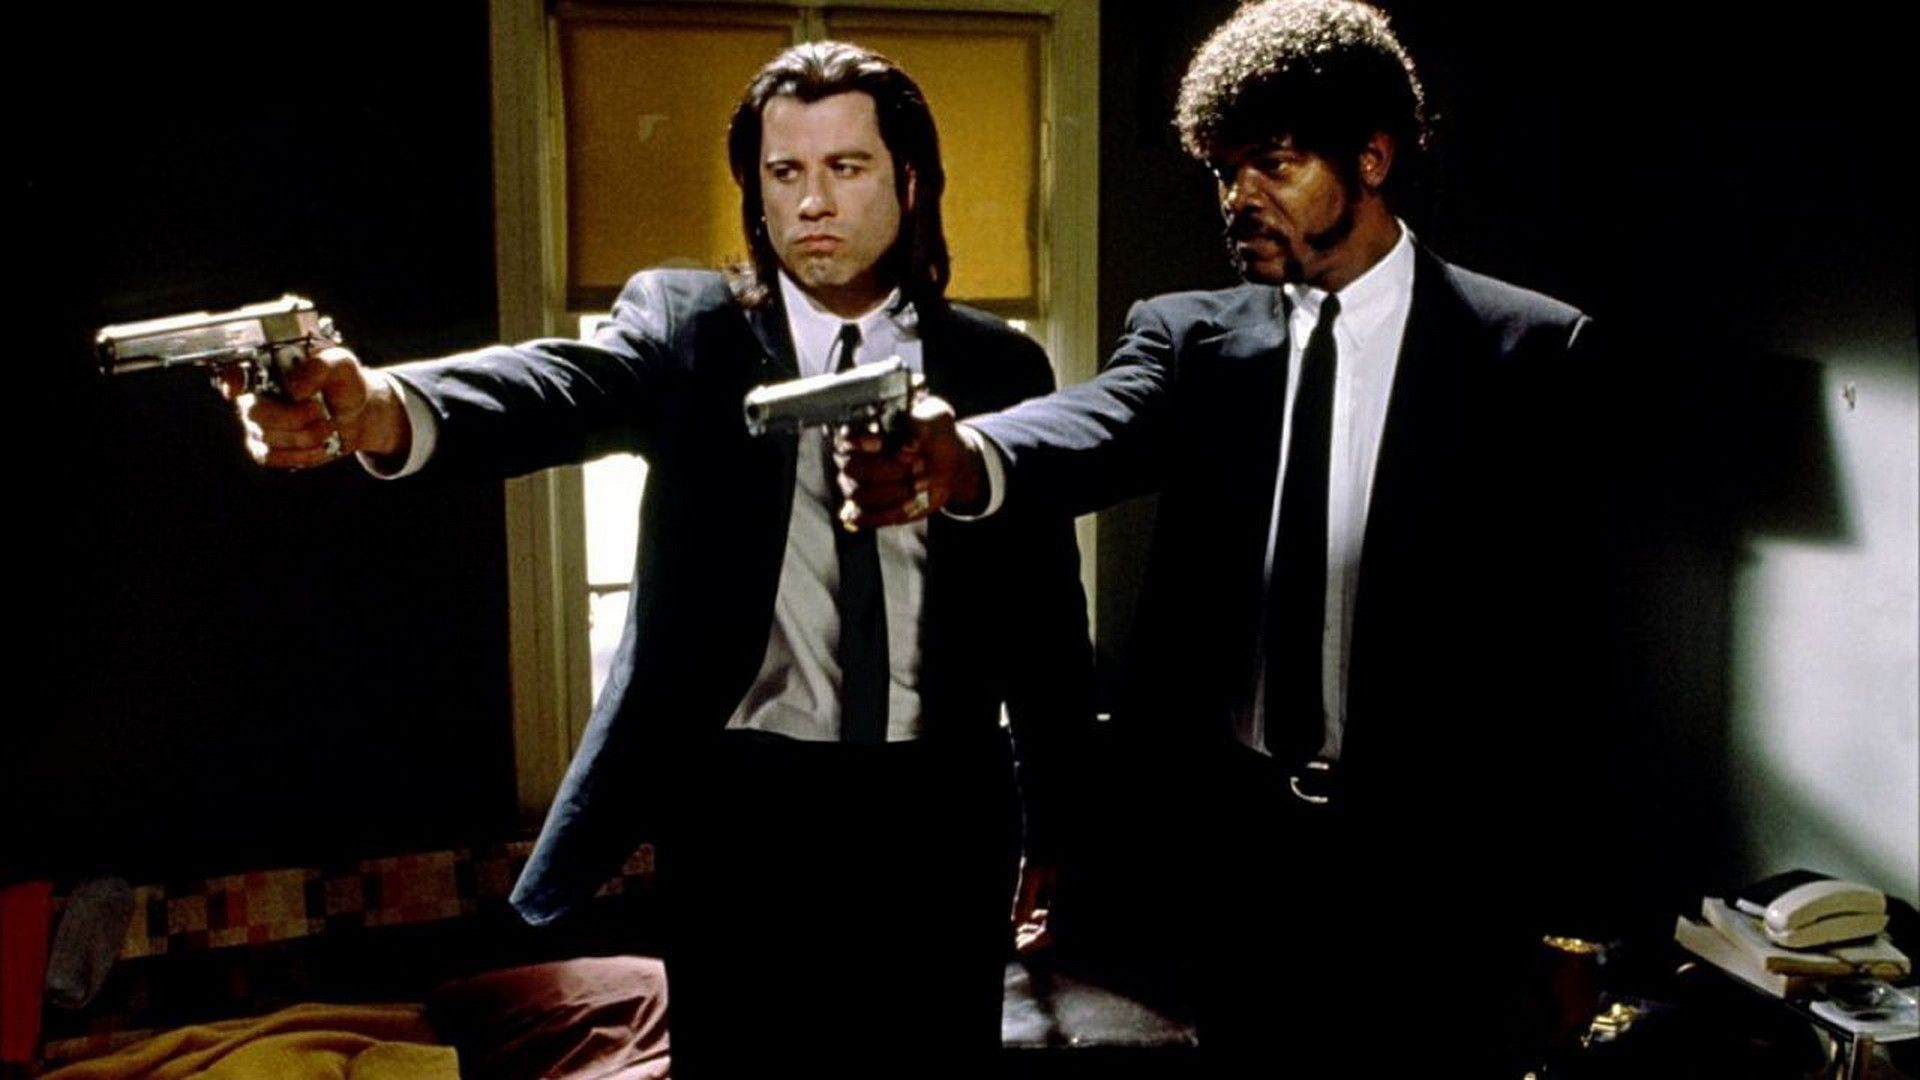 Pulp Fiction Wallpaper HD. Background. Photo. Image